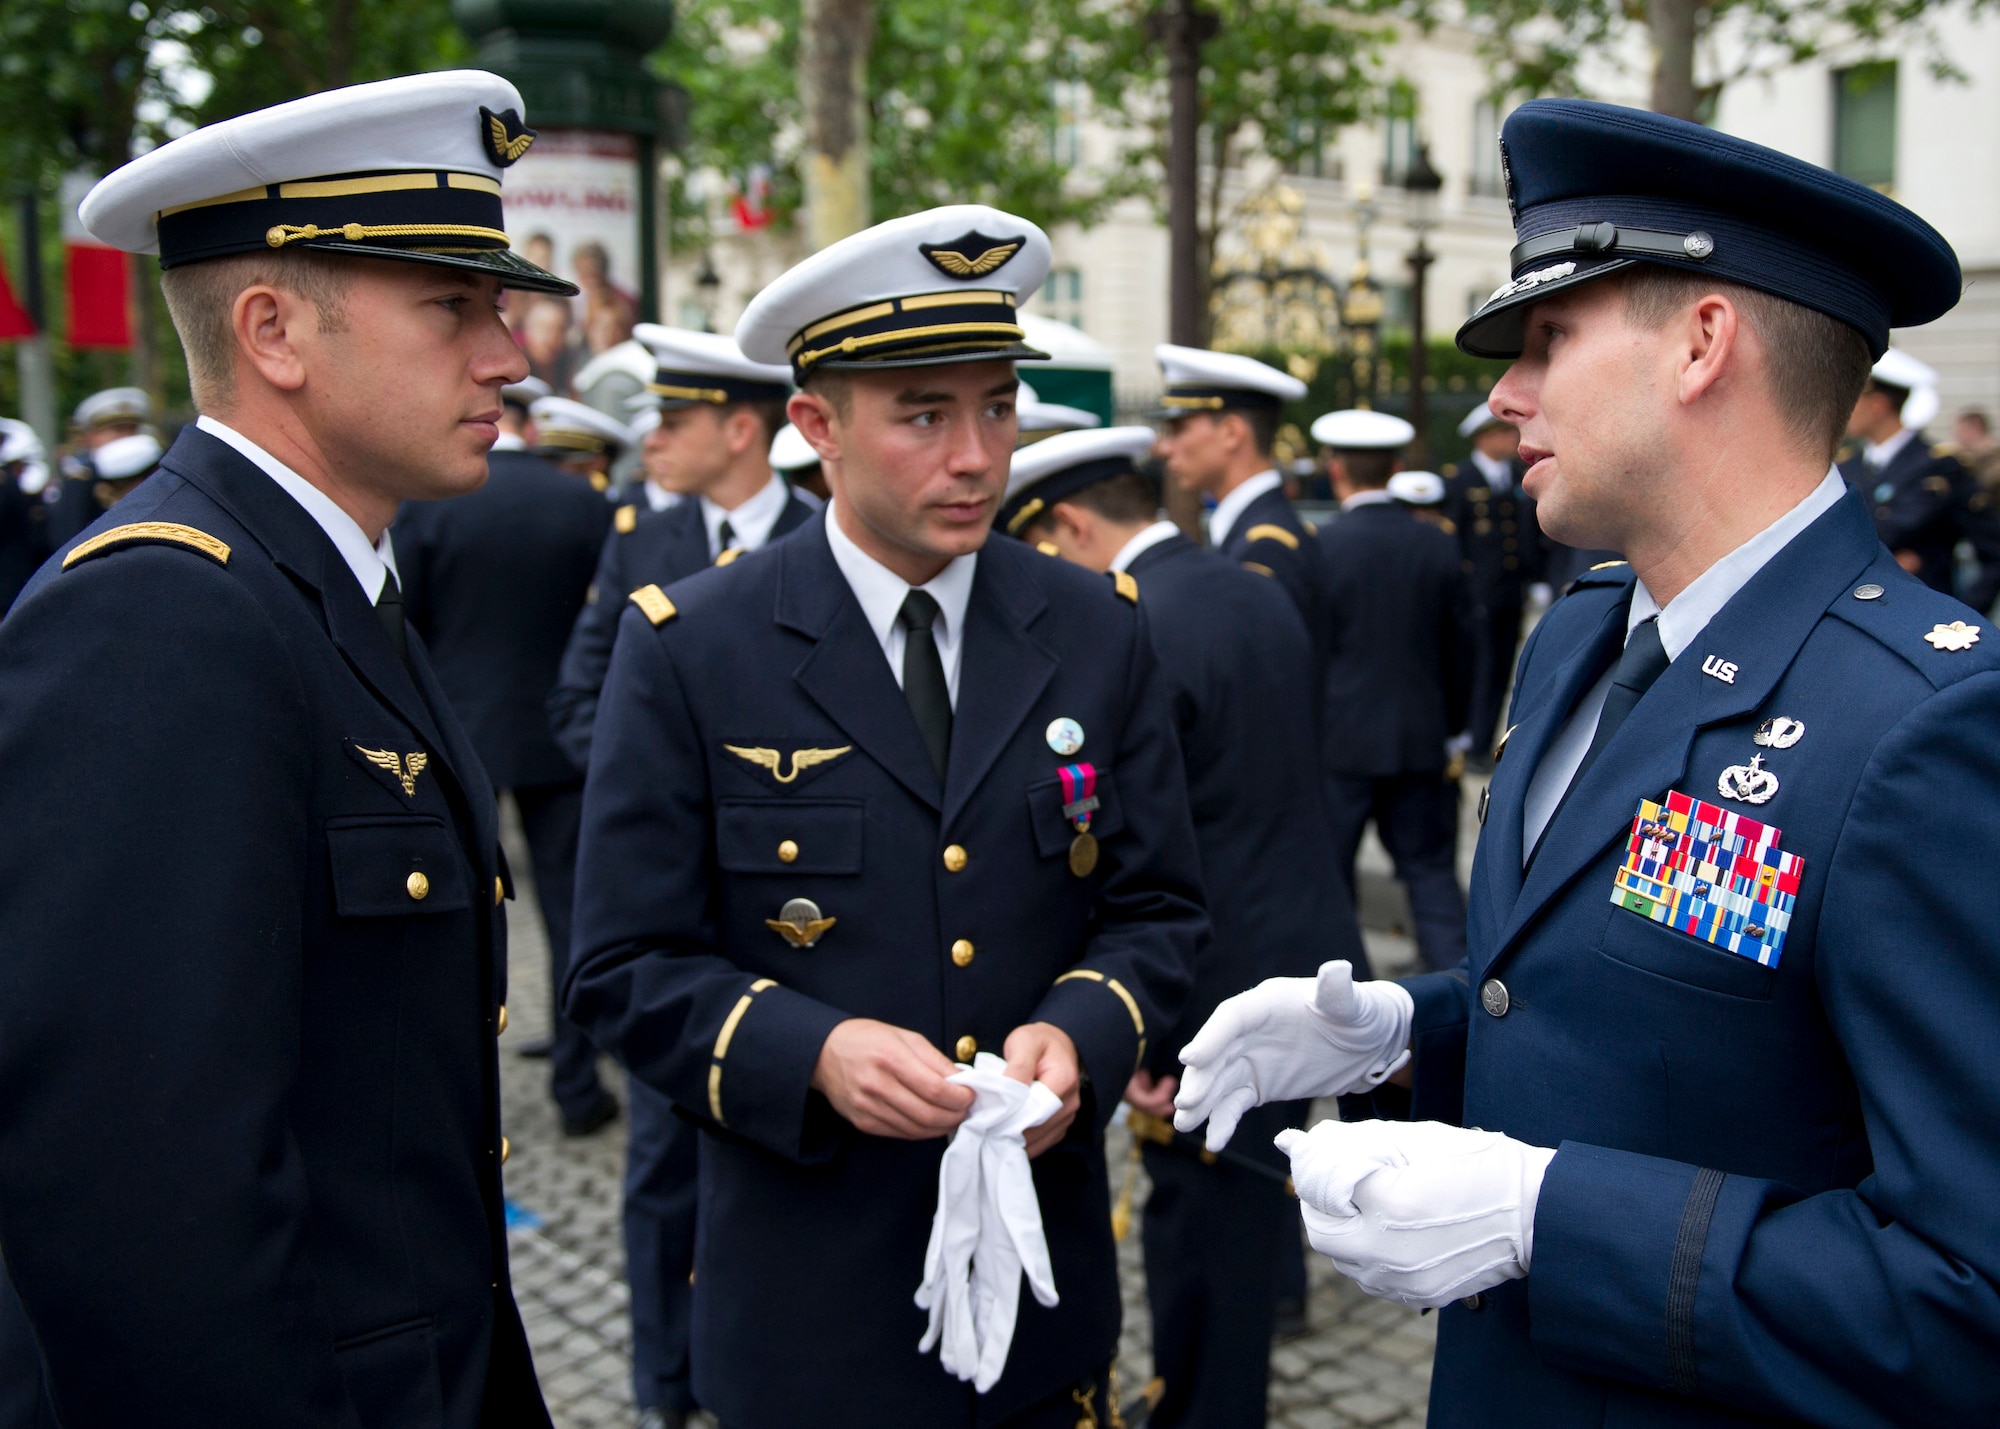 PARIS -- U.S. Air Force Maj. James Gingras, French Air Force Academy exchange officer, right, speaks with his cadets before marching in the 2012, 14th of July parade in Paris. The 14th of July, known in English by Bastille Day, is the French equivalent of the American 4th of July. It commemorates the attack on the Bastille on July 14, 1989, which preceded the French revolution. (U.S. Air Force photo/Staff Sgt. Benjamin Wilson)